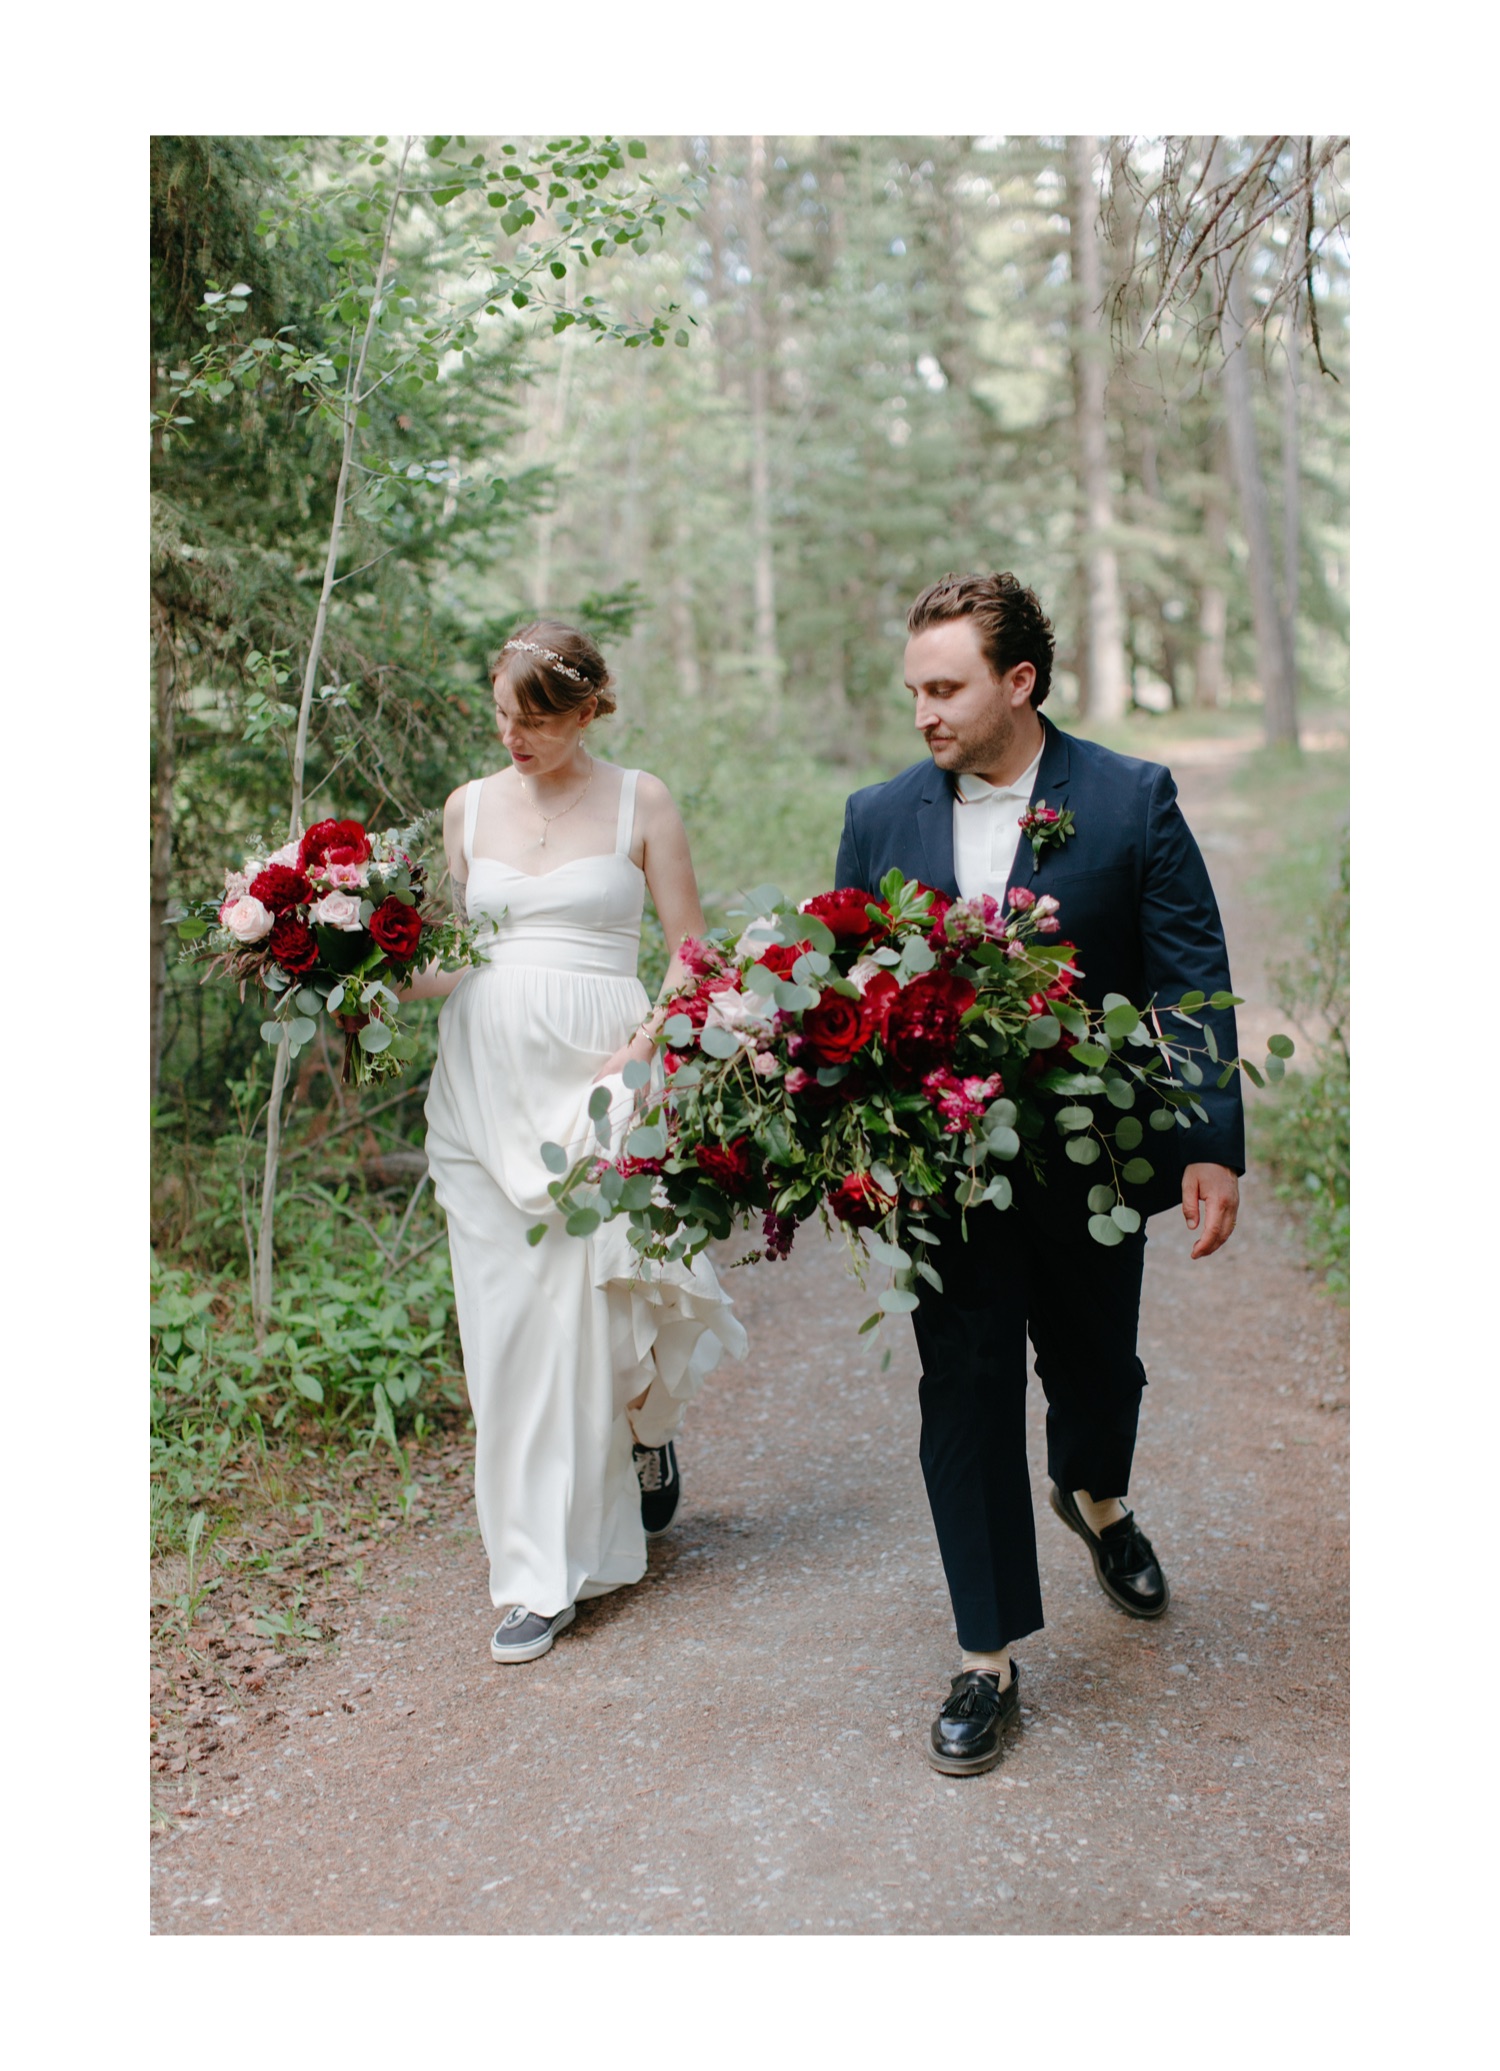 Married couple wearing Reformation Dress and Hugo Boss suit carrying red, pink, white, and greenery florals in the forest